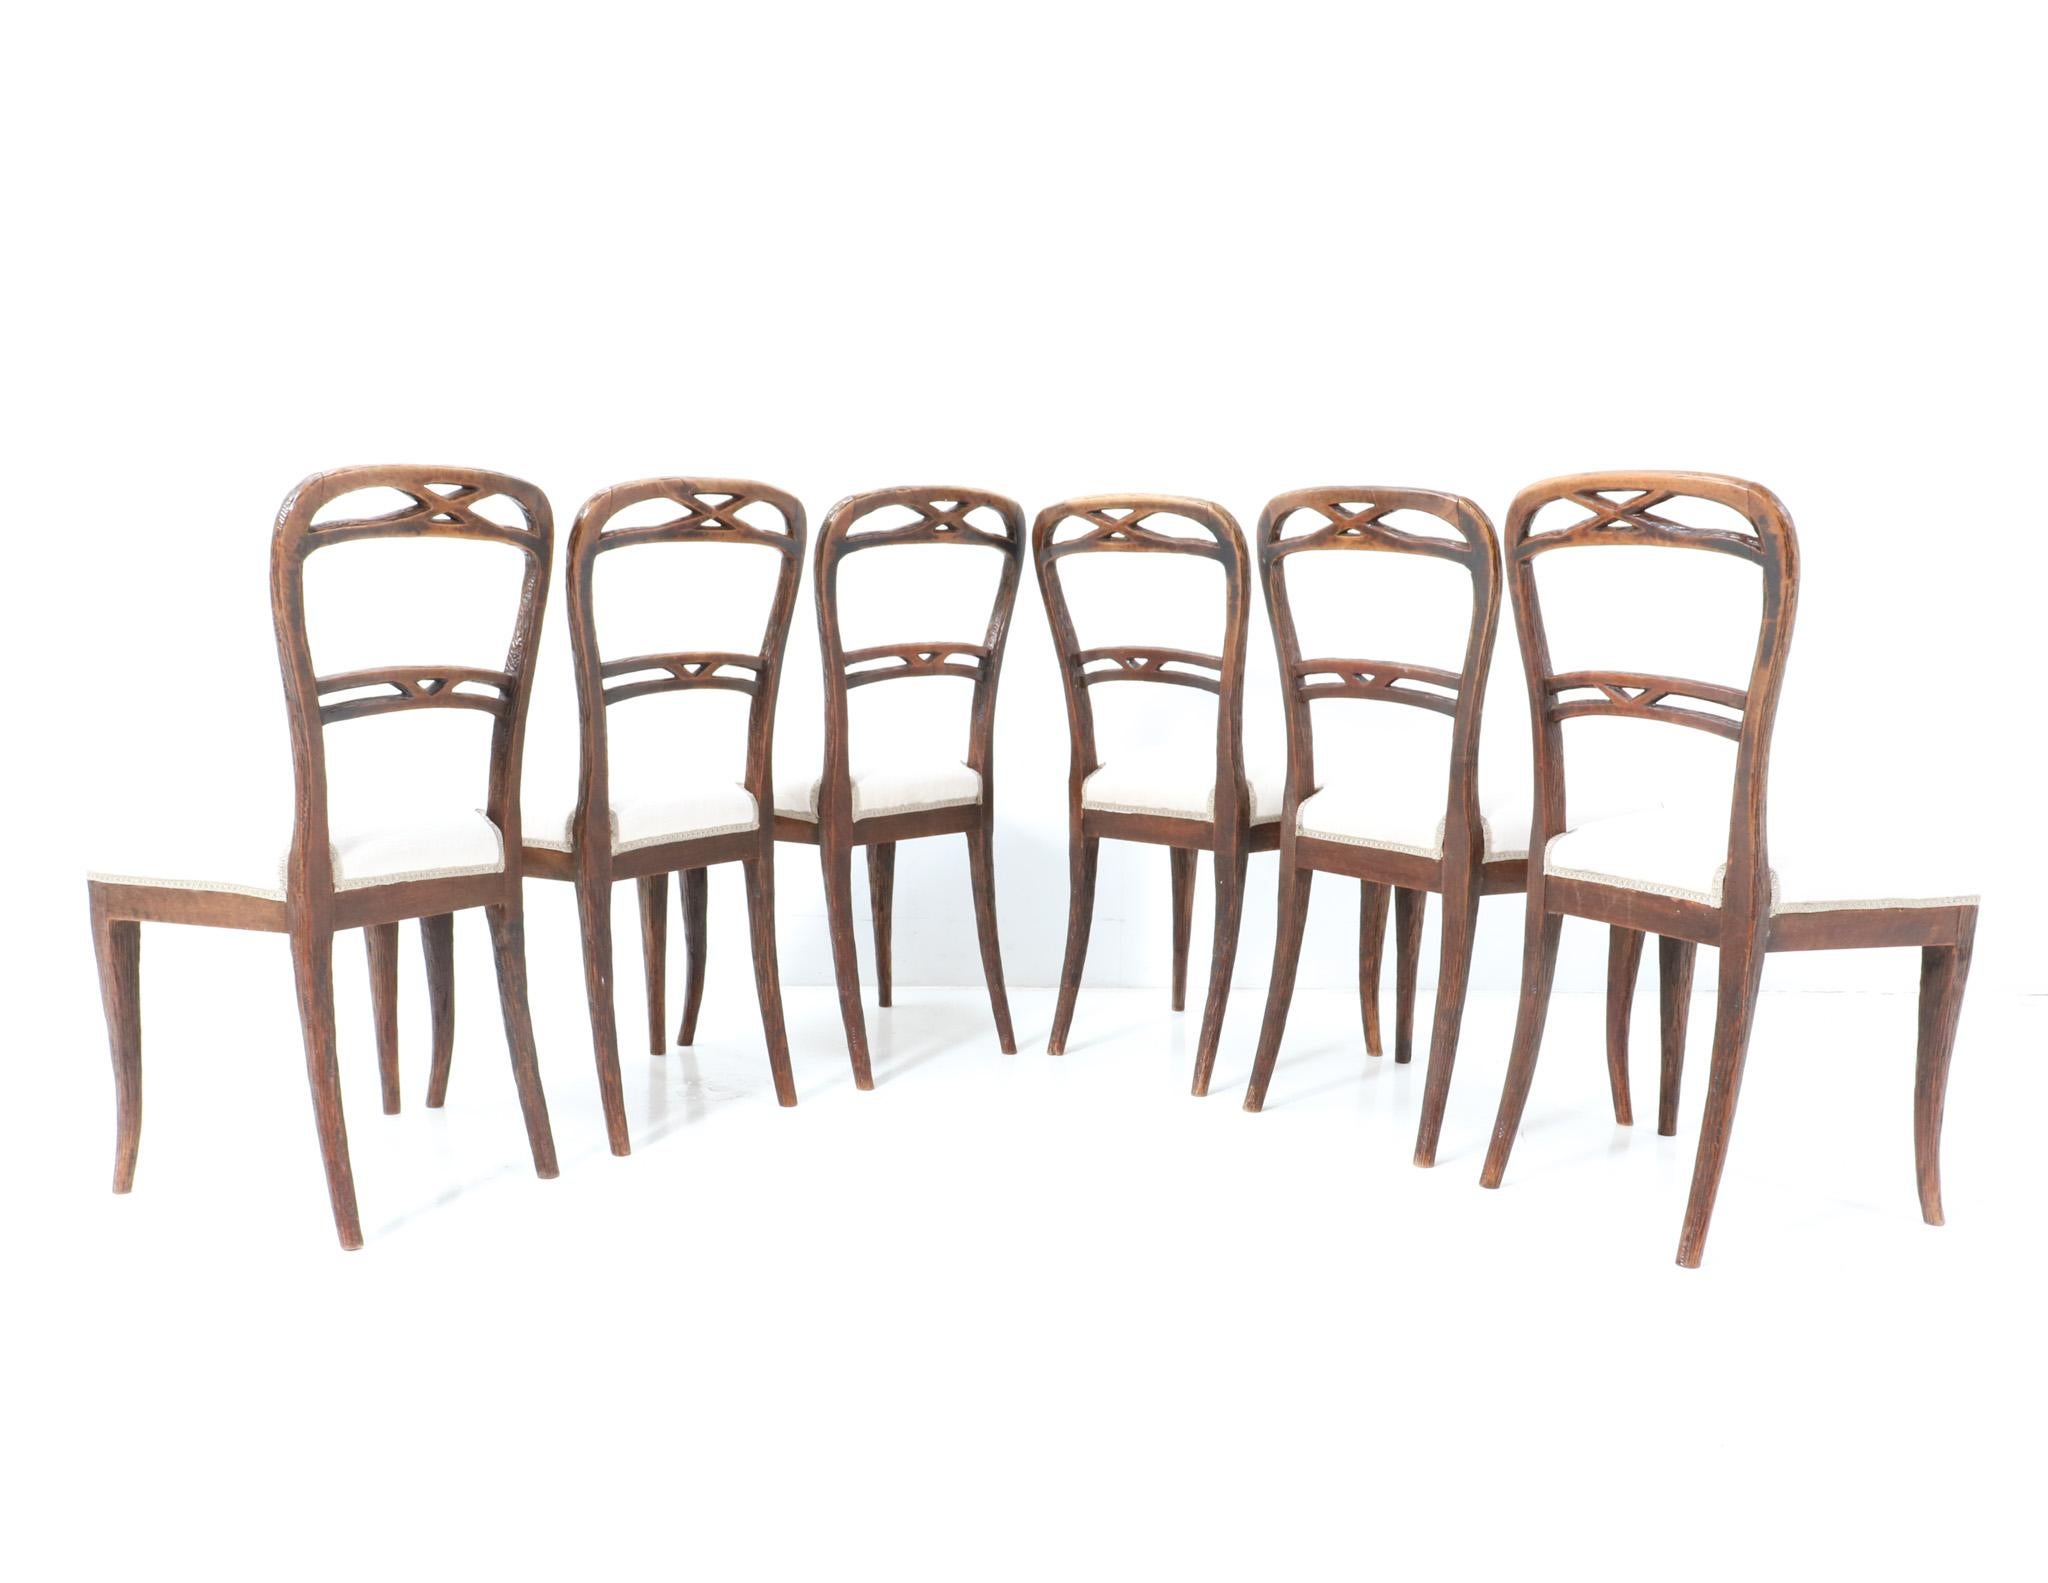 Dutch  Black Forest Walnut Dining  Chairs by Matthijs Horrix for Horrix, 1880s